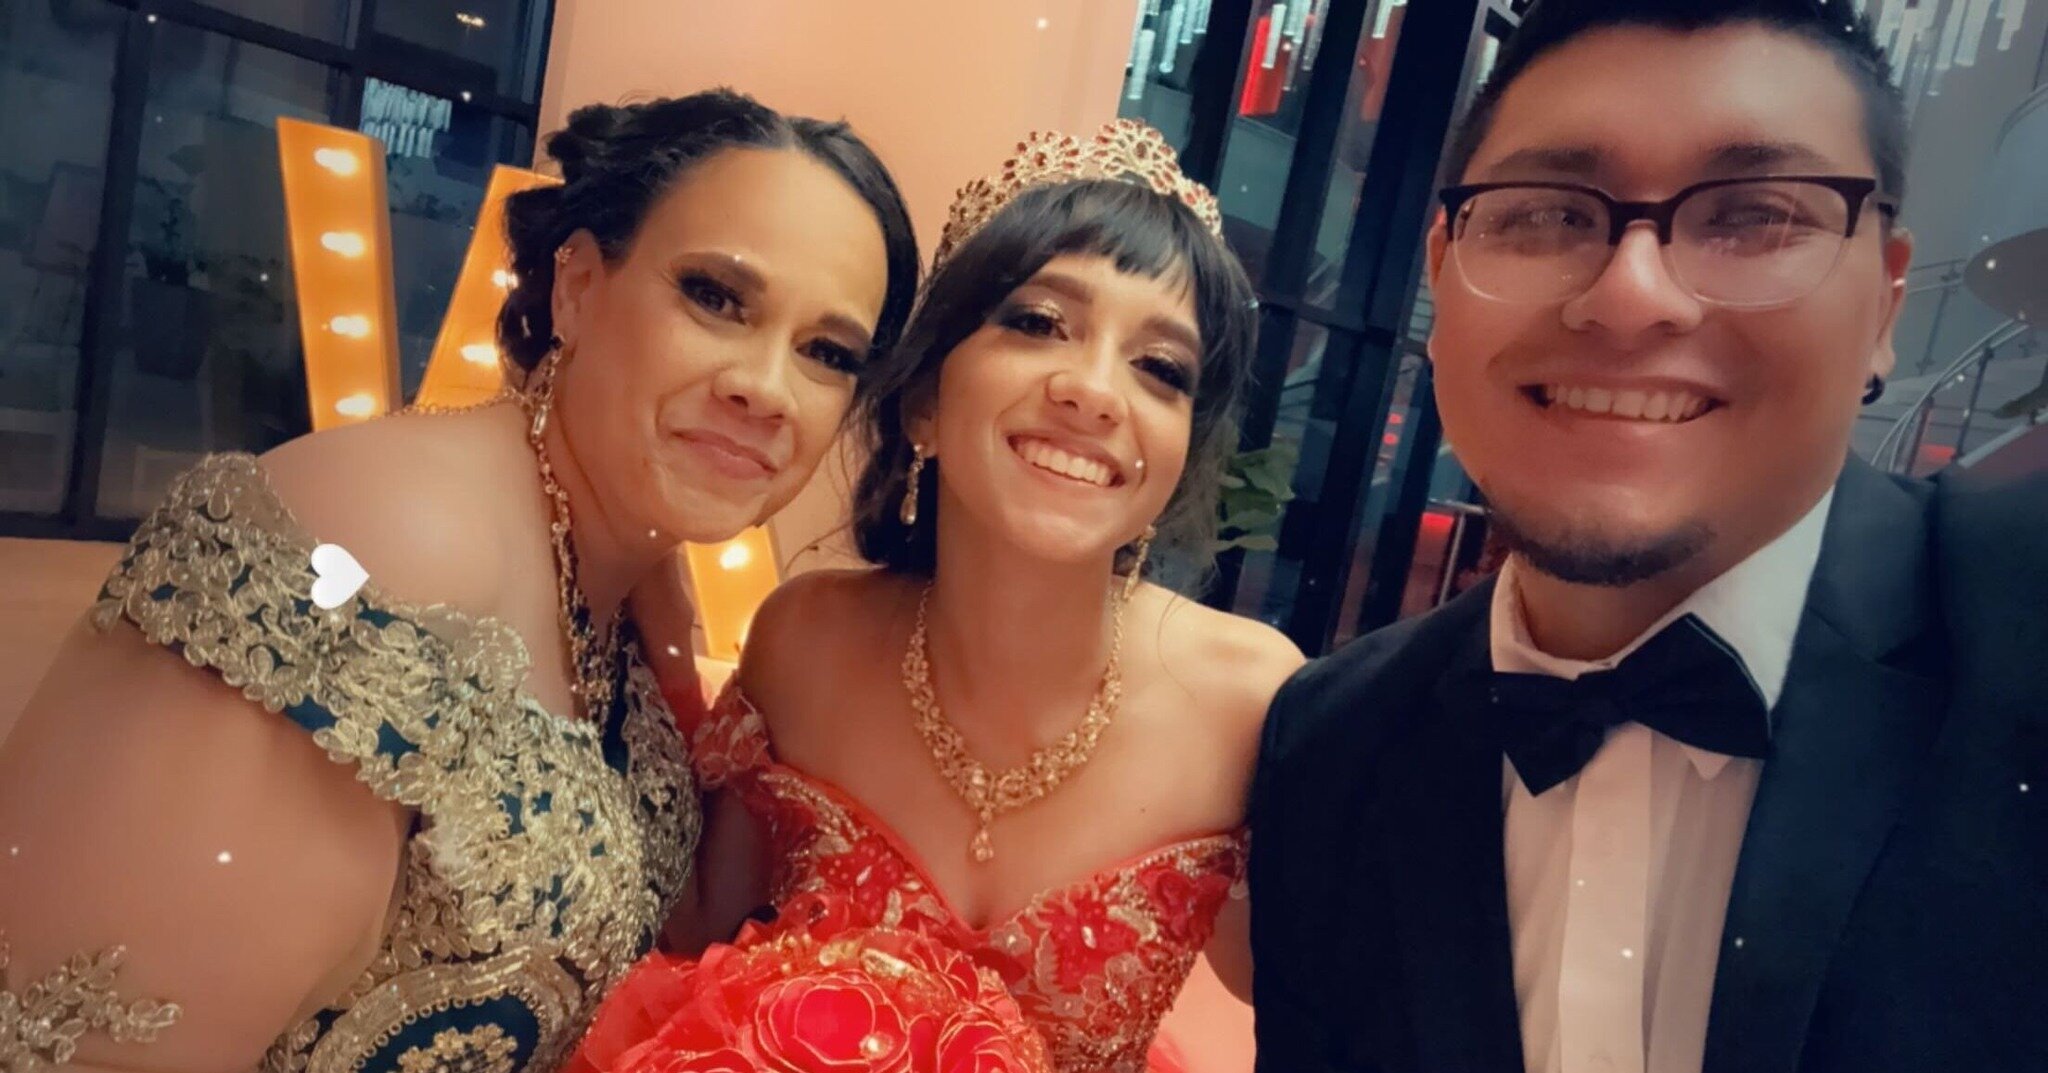 🌟 Another Quincea&ntilde;era success story in the books! 🌟🎉 Big love and high-fives to our dance maestro, Emma, for turning Anneliese and her chambelanes into dance floor royalty! 🕺💃

Emma, you're a legend! Great job making the guys feel like da